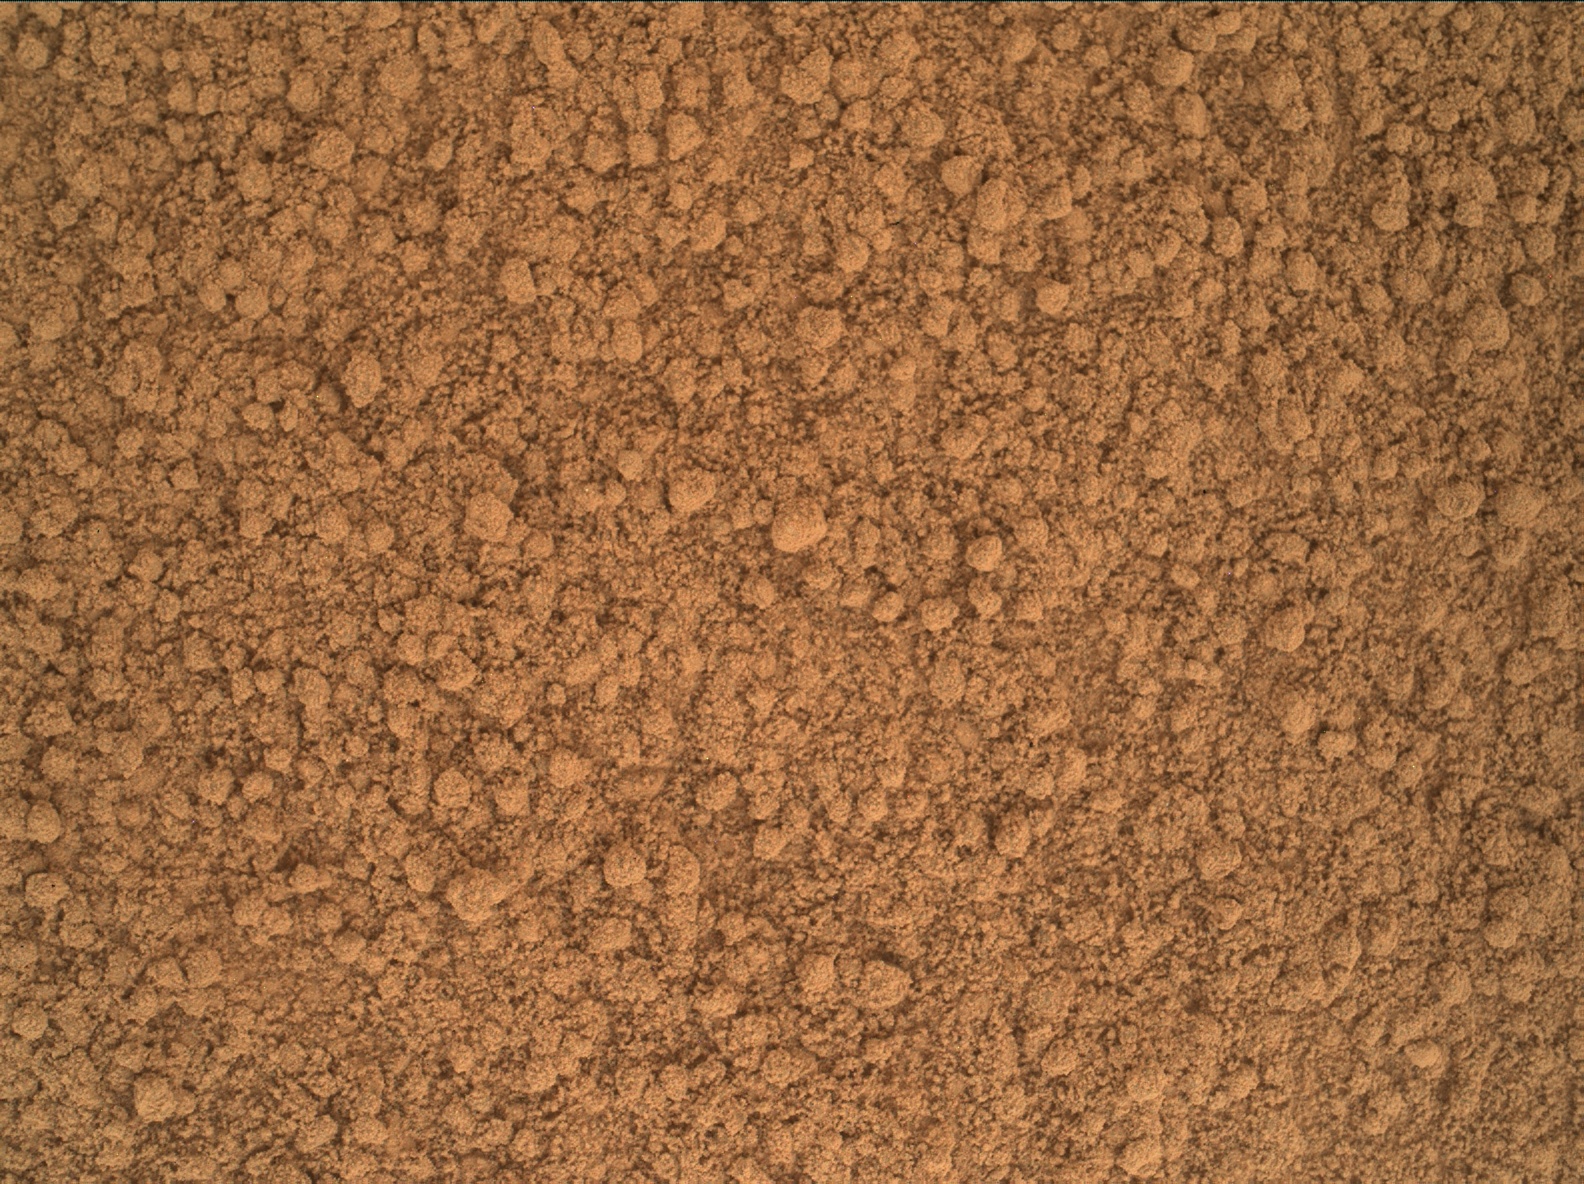 Nasa's Mars rover Curiosity acquired this image using its Mars Hand Lens Imager (MAHLI) on Sol 74